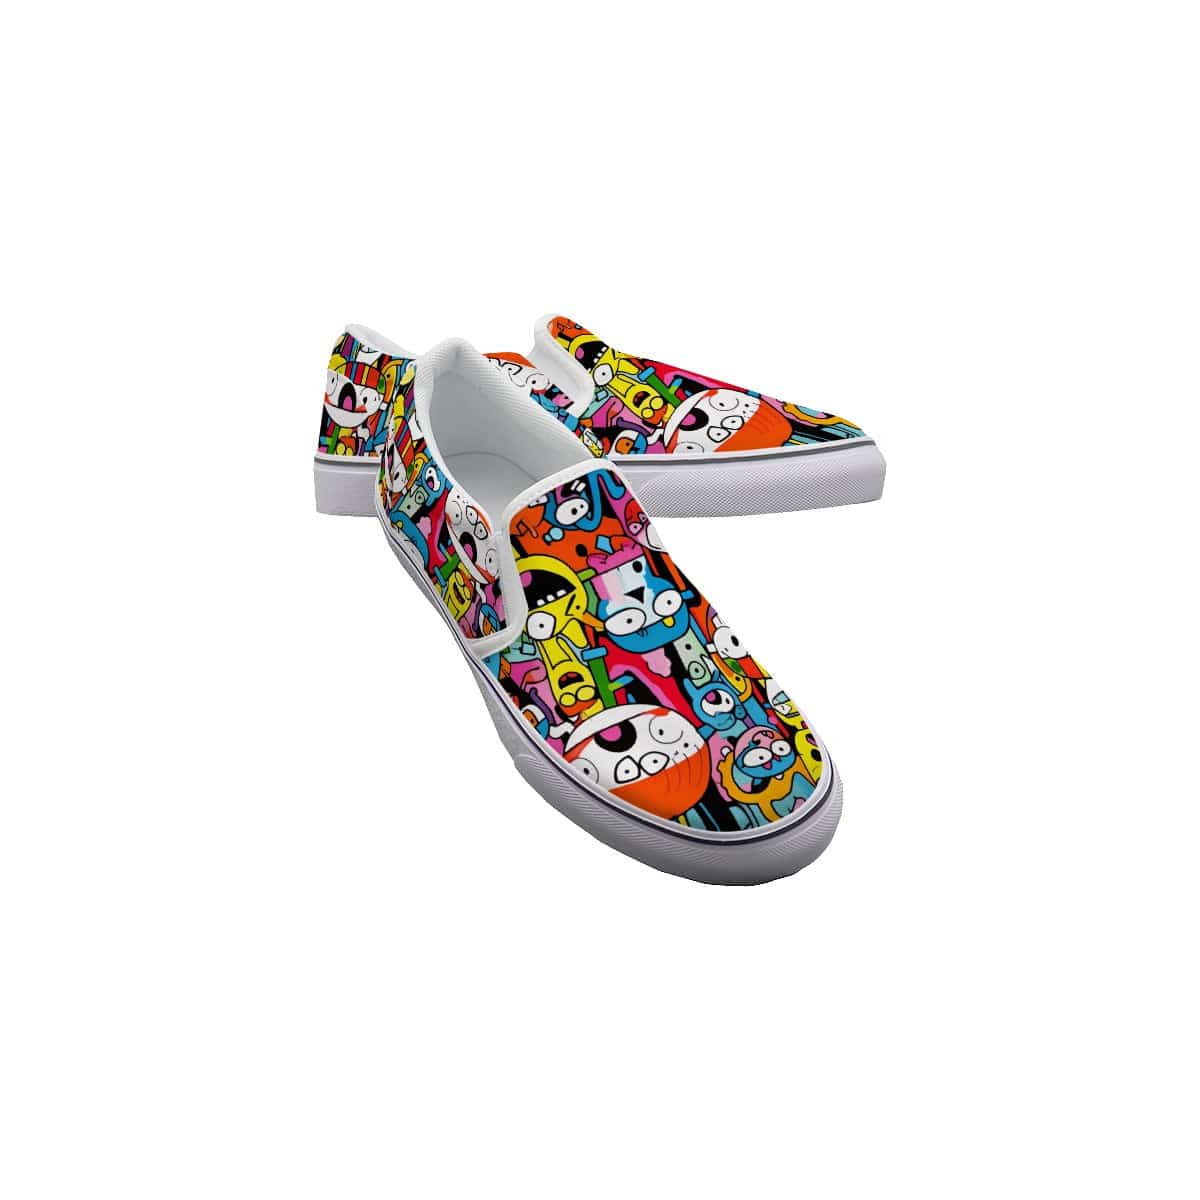 Yoycol White / US6(EUR36) Quirky Friend or Foe - Women's Slip On Sneakers